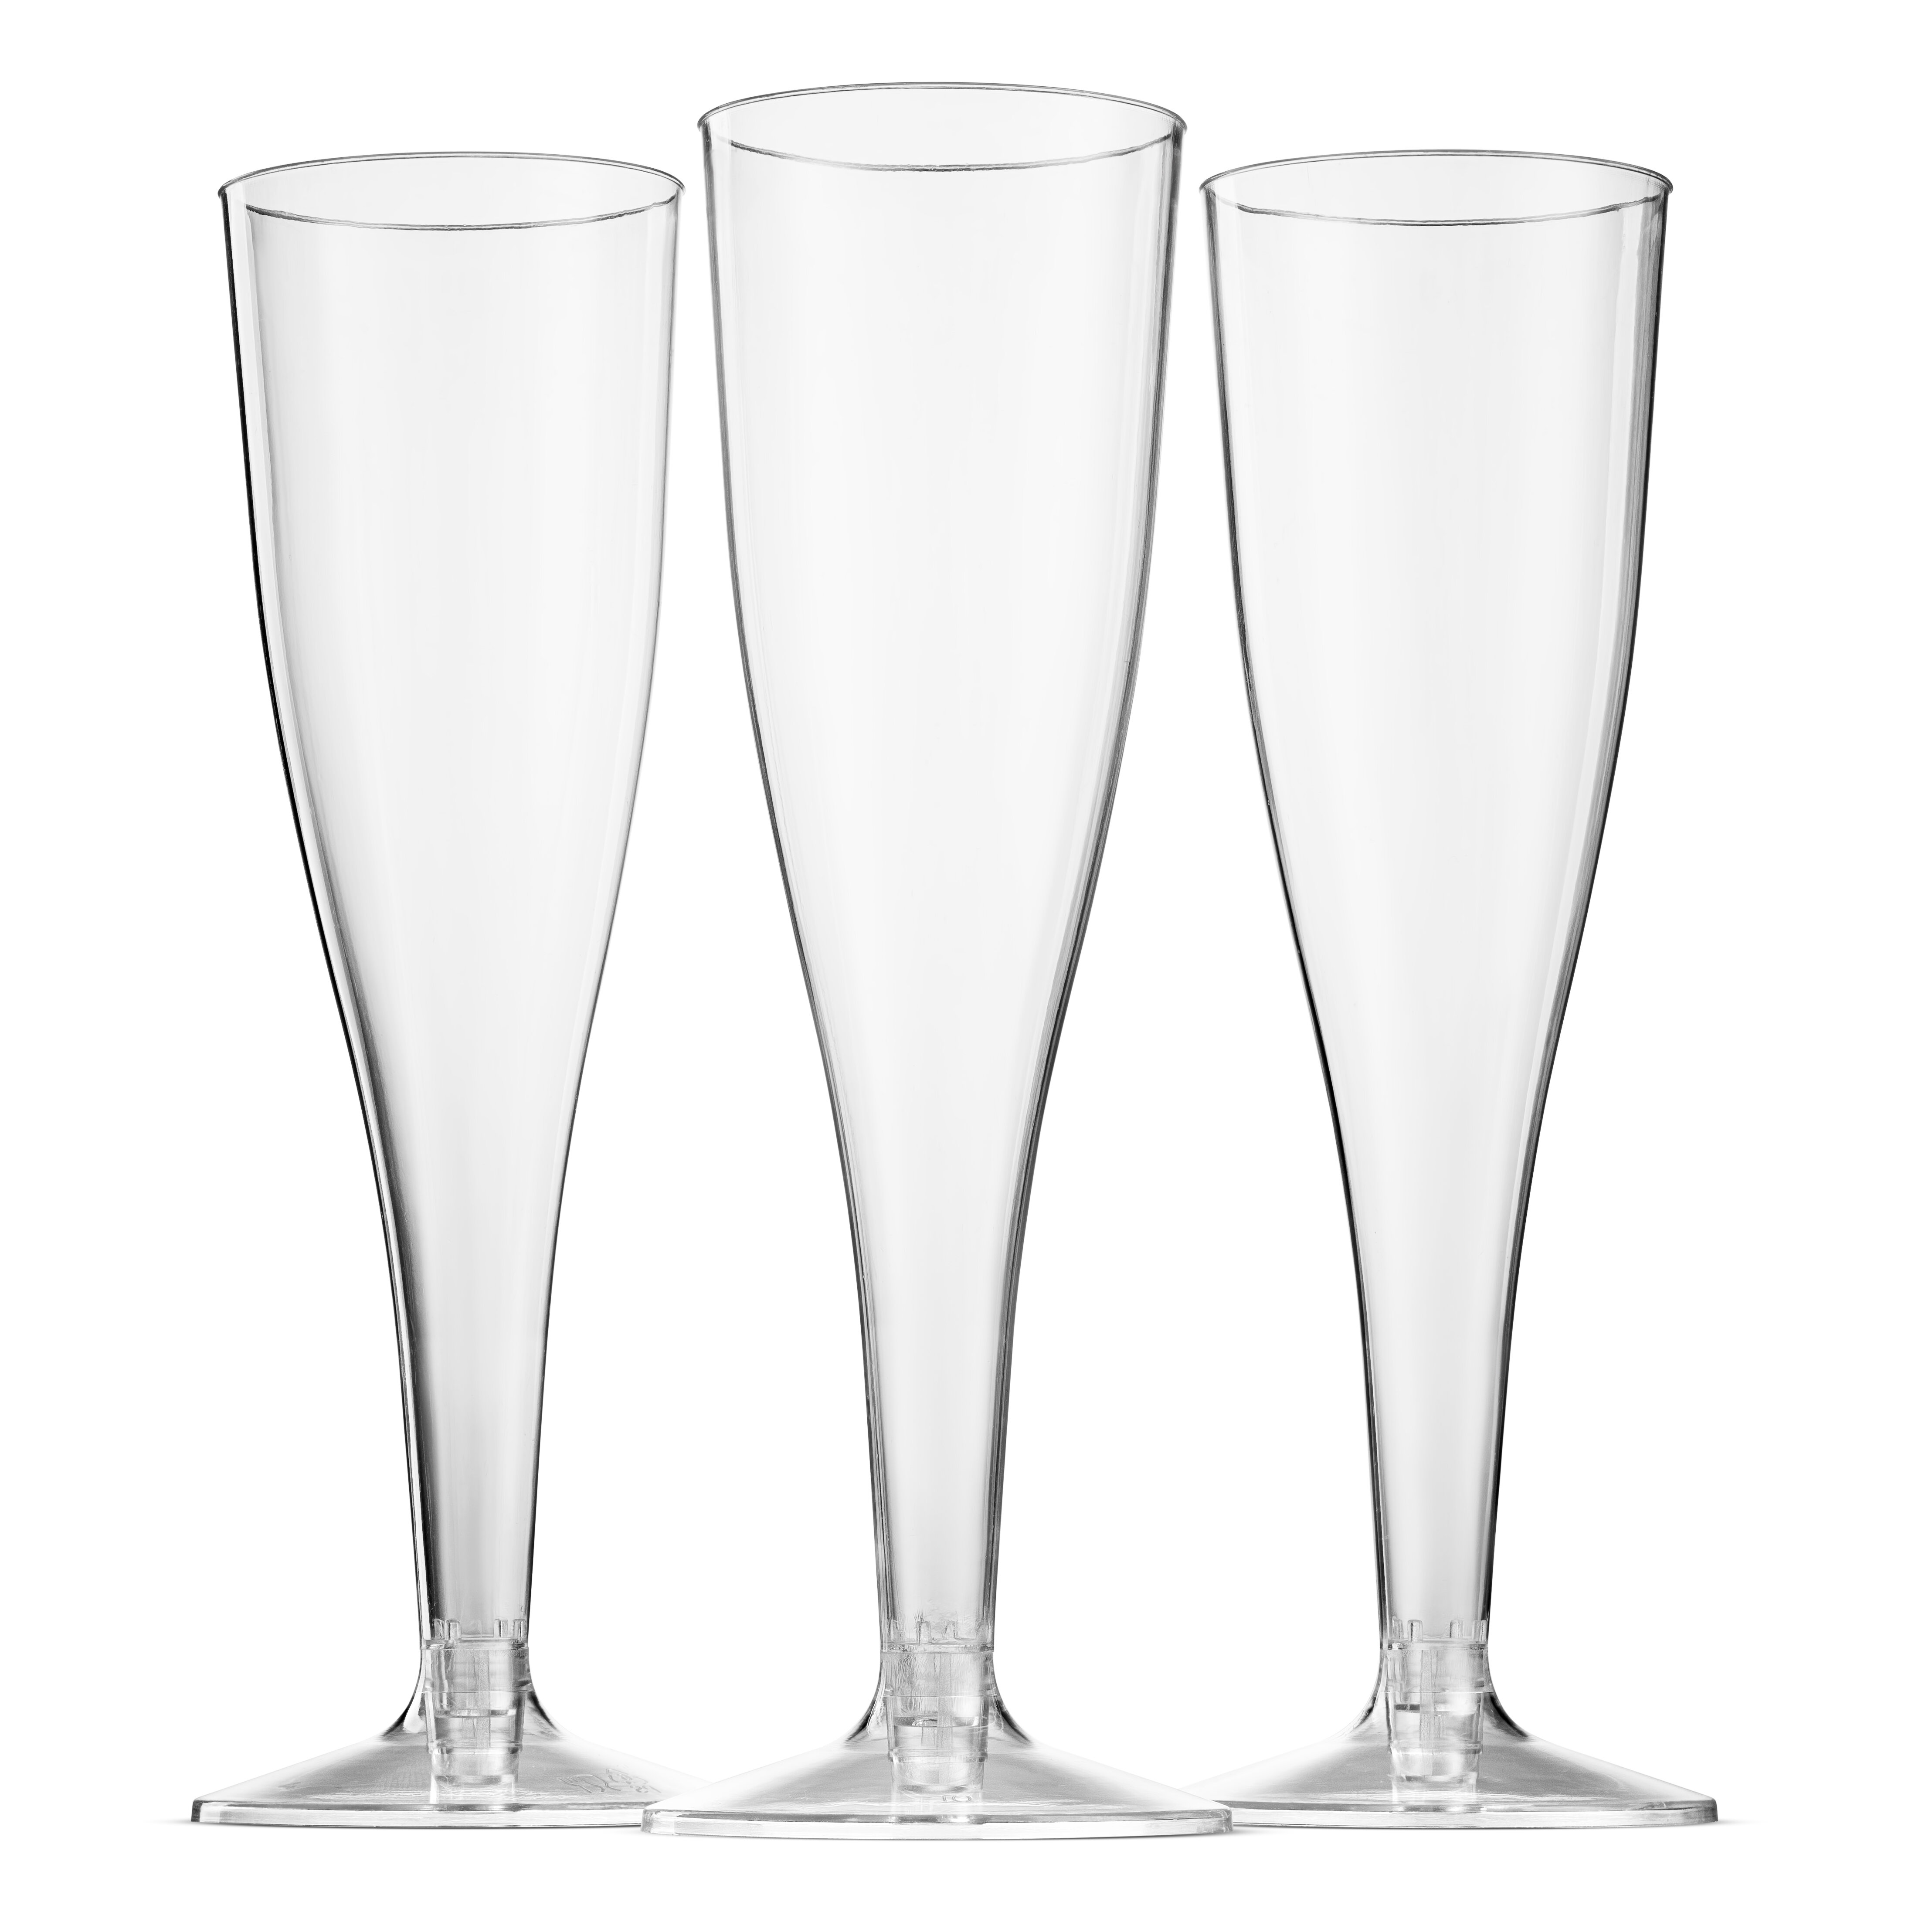 Plastic Champagne Flutes | Disposable Plastic Champagne Glasses for Parties  - Mimosa Glasses, Cocktail Glasses, Wedding Champagne Flutes Plastic Cup